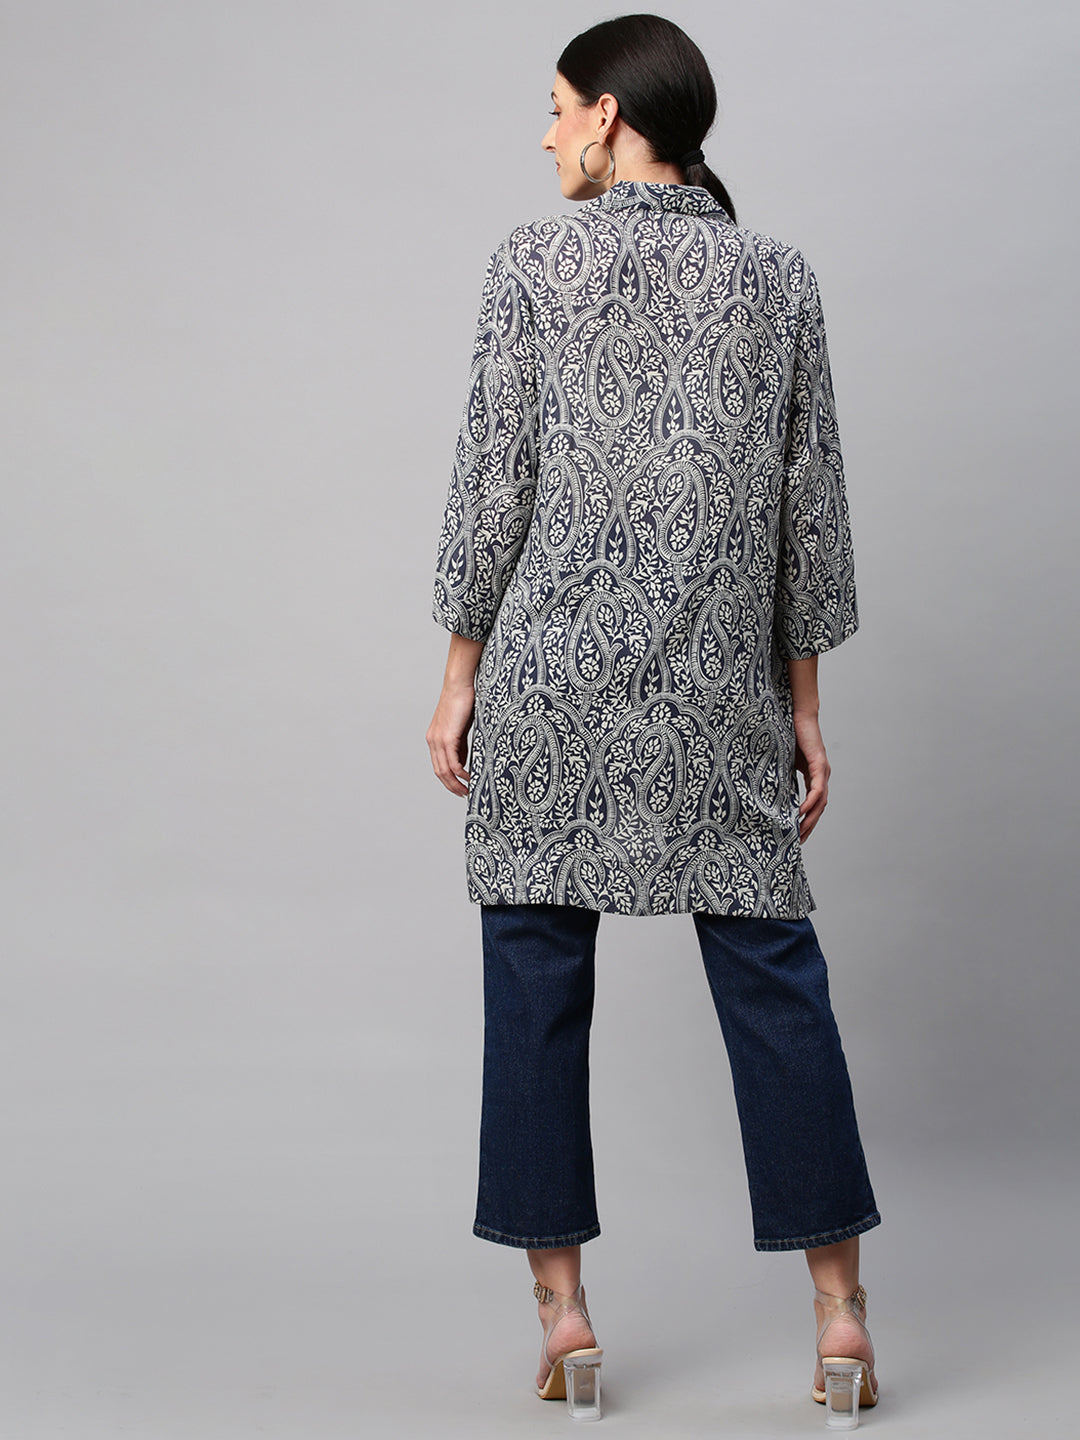 Paisley Printed Modal Tunic With Embroidery